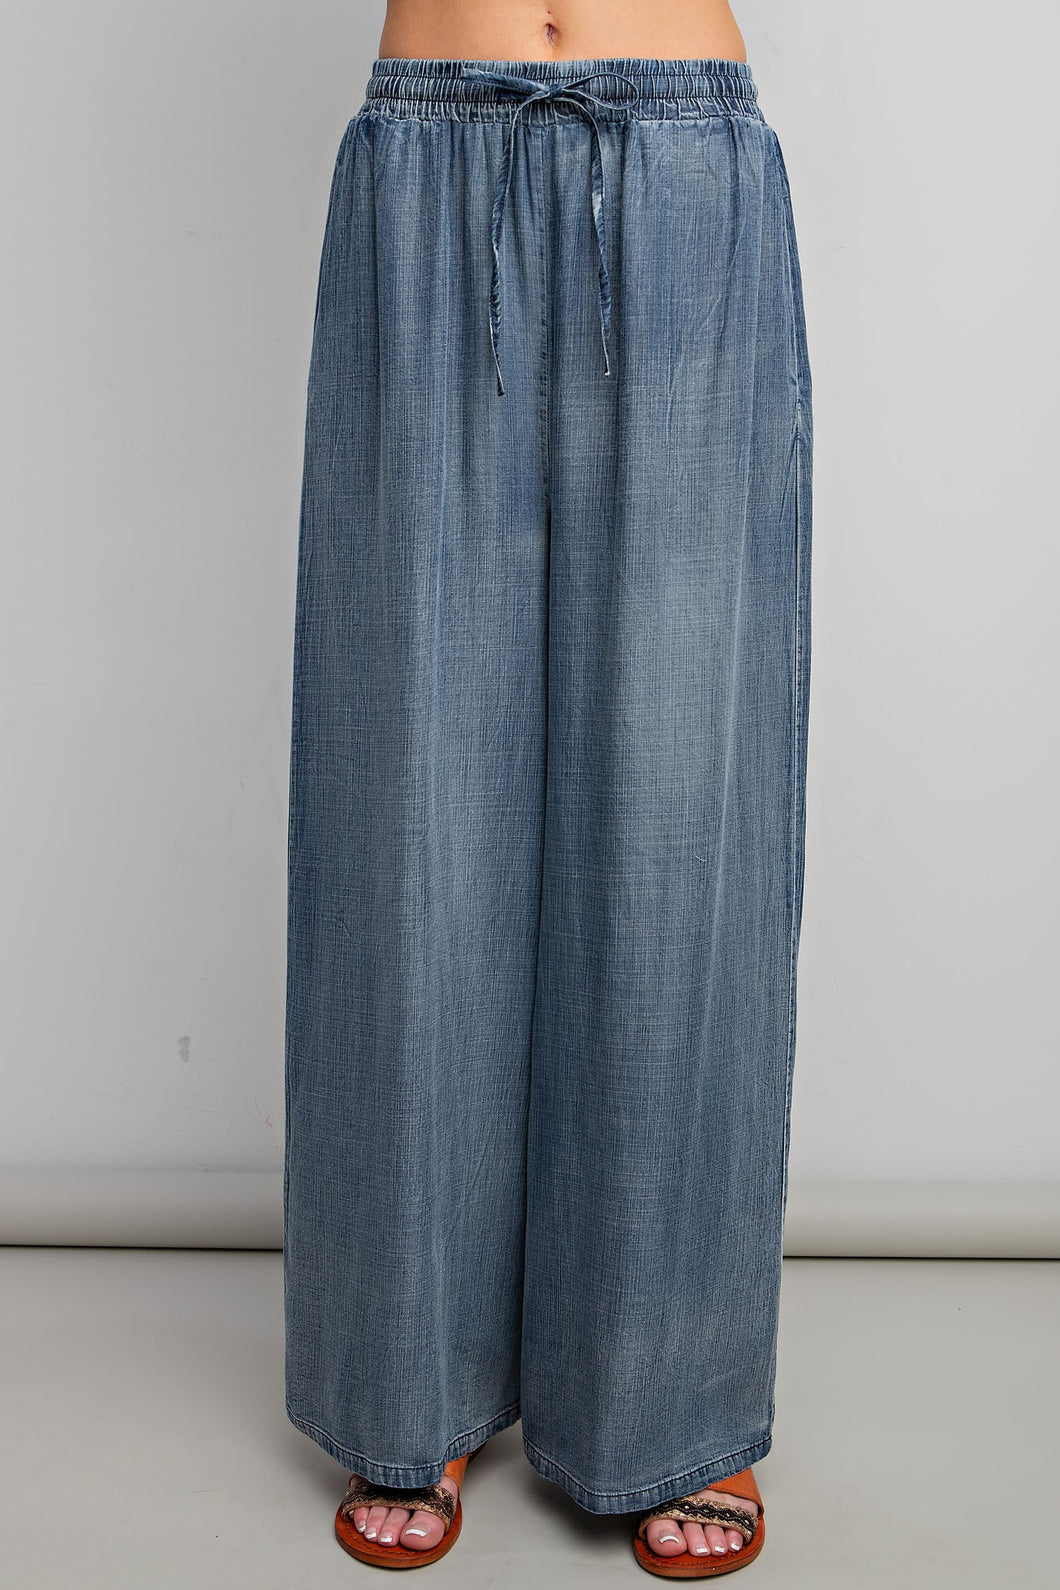 Easel Mineral Washed Chambray Wide Leg Pants in Washed Denim Pants Easel   